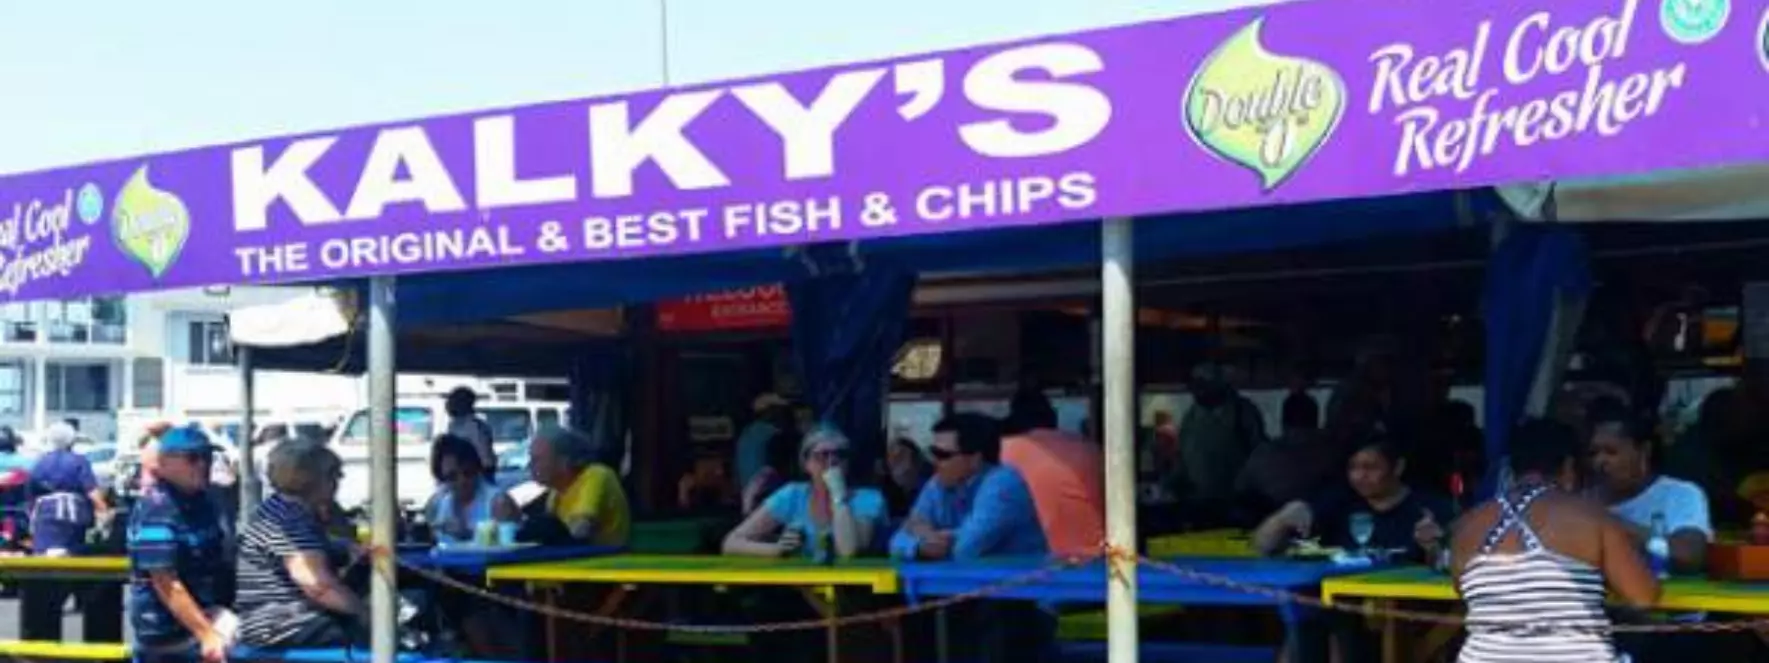 kalkys kalk bay things to do in cape town under r200